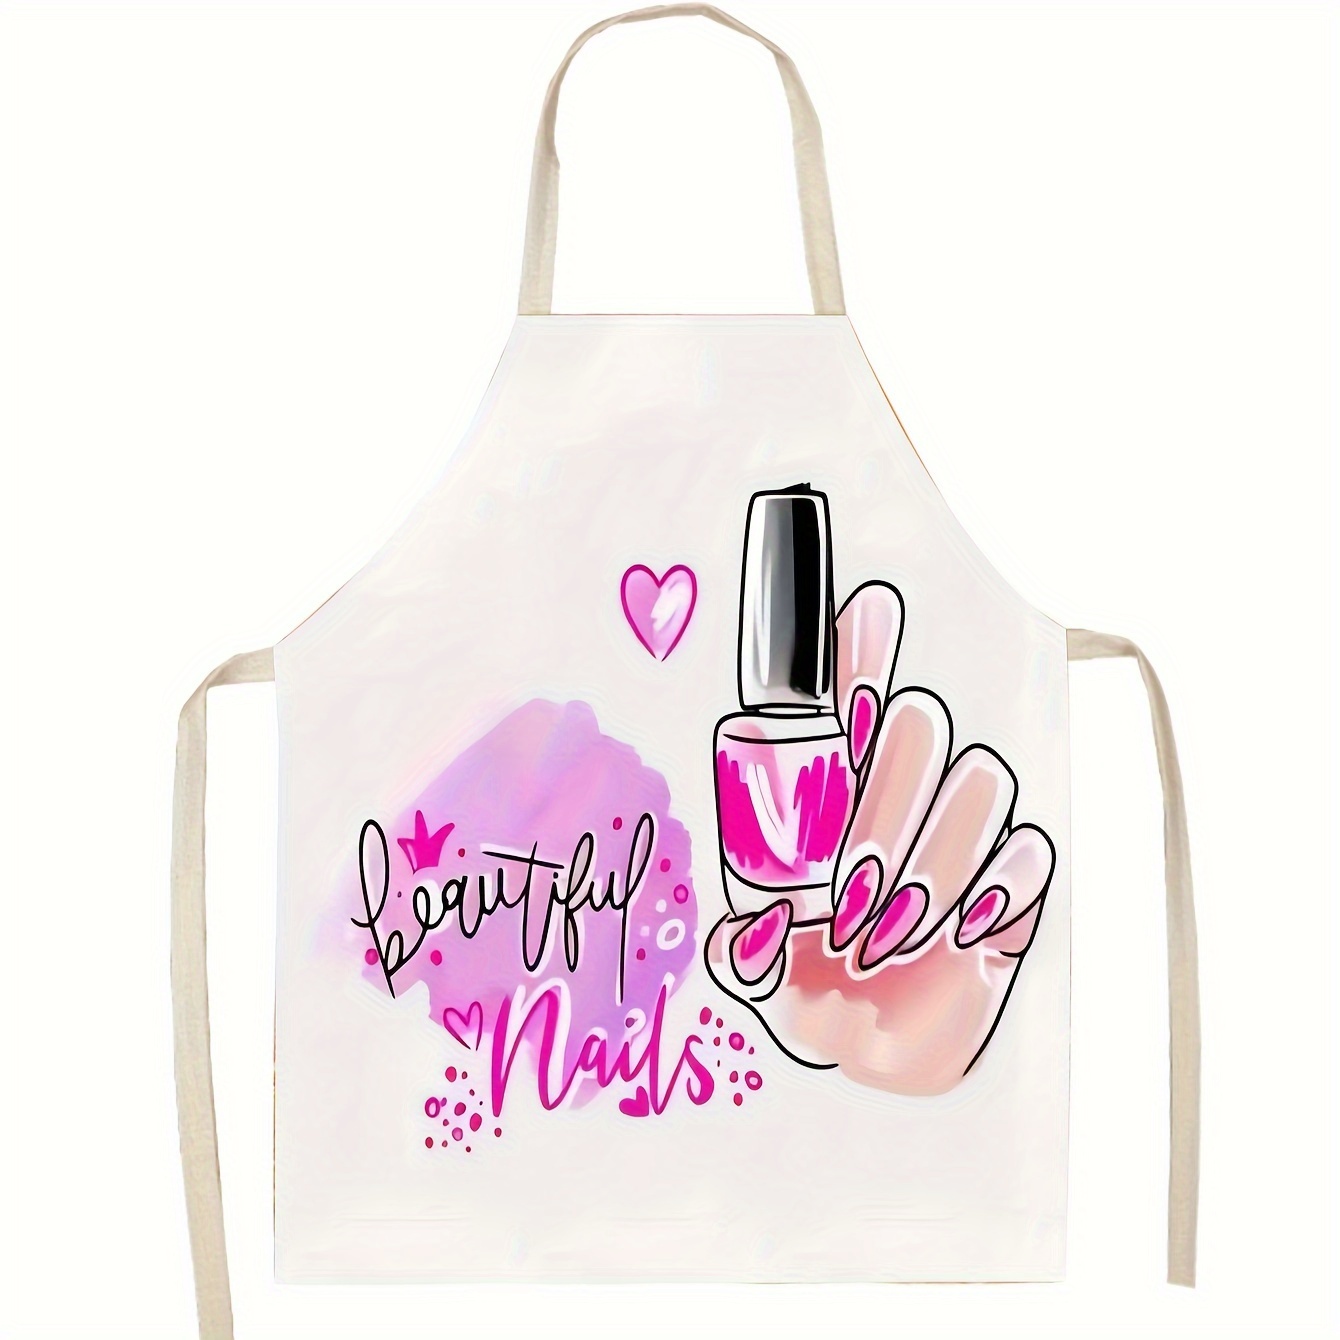 

1pc, Stylish Linen Apron, Waterproof Bib Apron With "beautiful Nails" Illustration, Stain-resistant Kitchen Apron For Restaurant Staff & Chefs, Artistic Nail Design Apron For Cooking And Baking